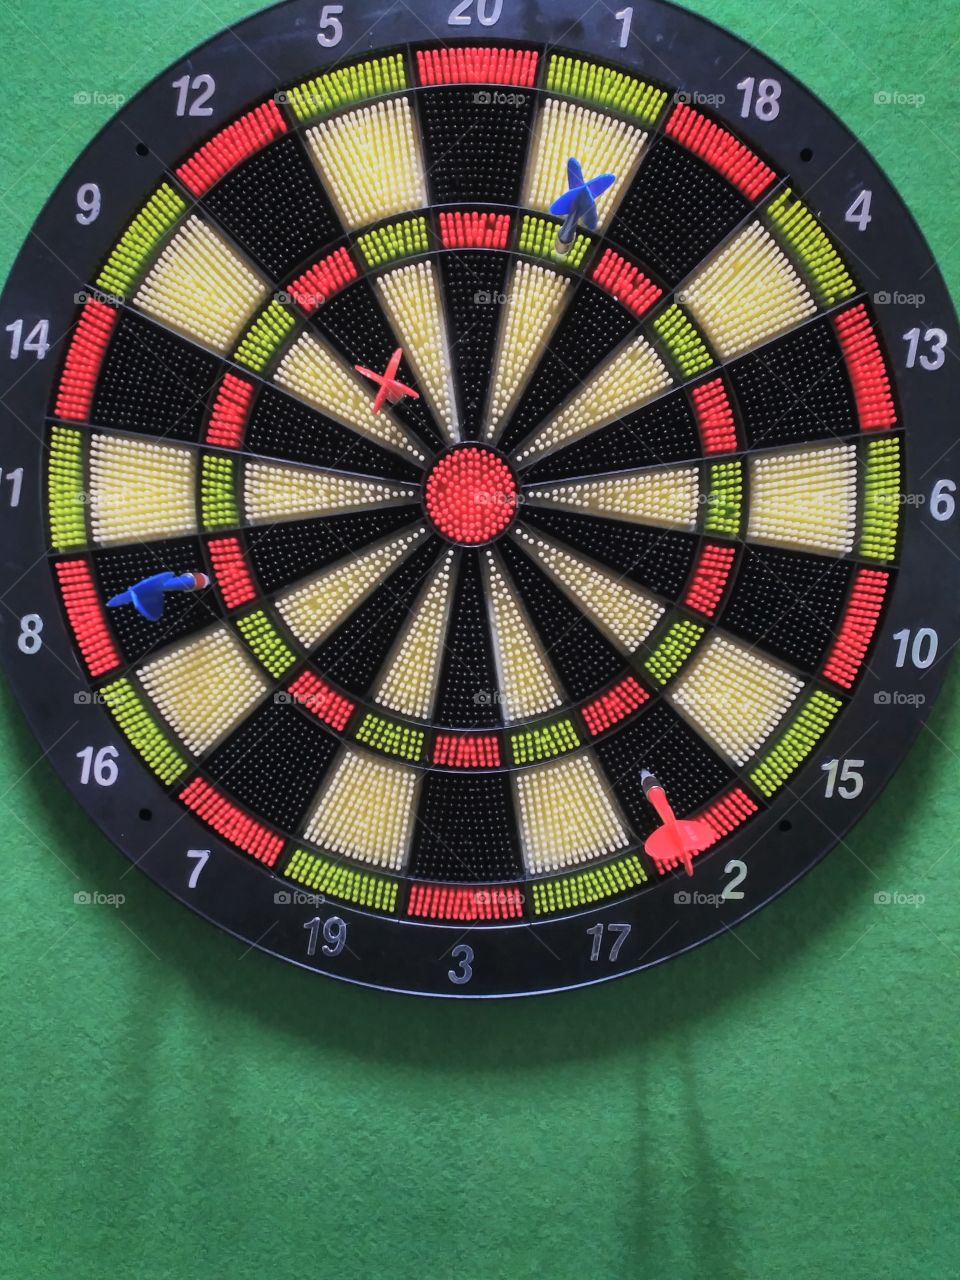 Dart play at work. a dart board at work is a great stress buster